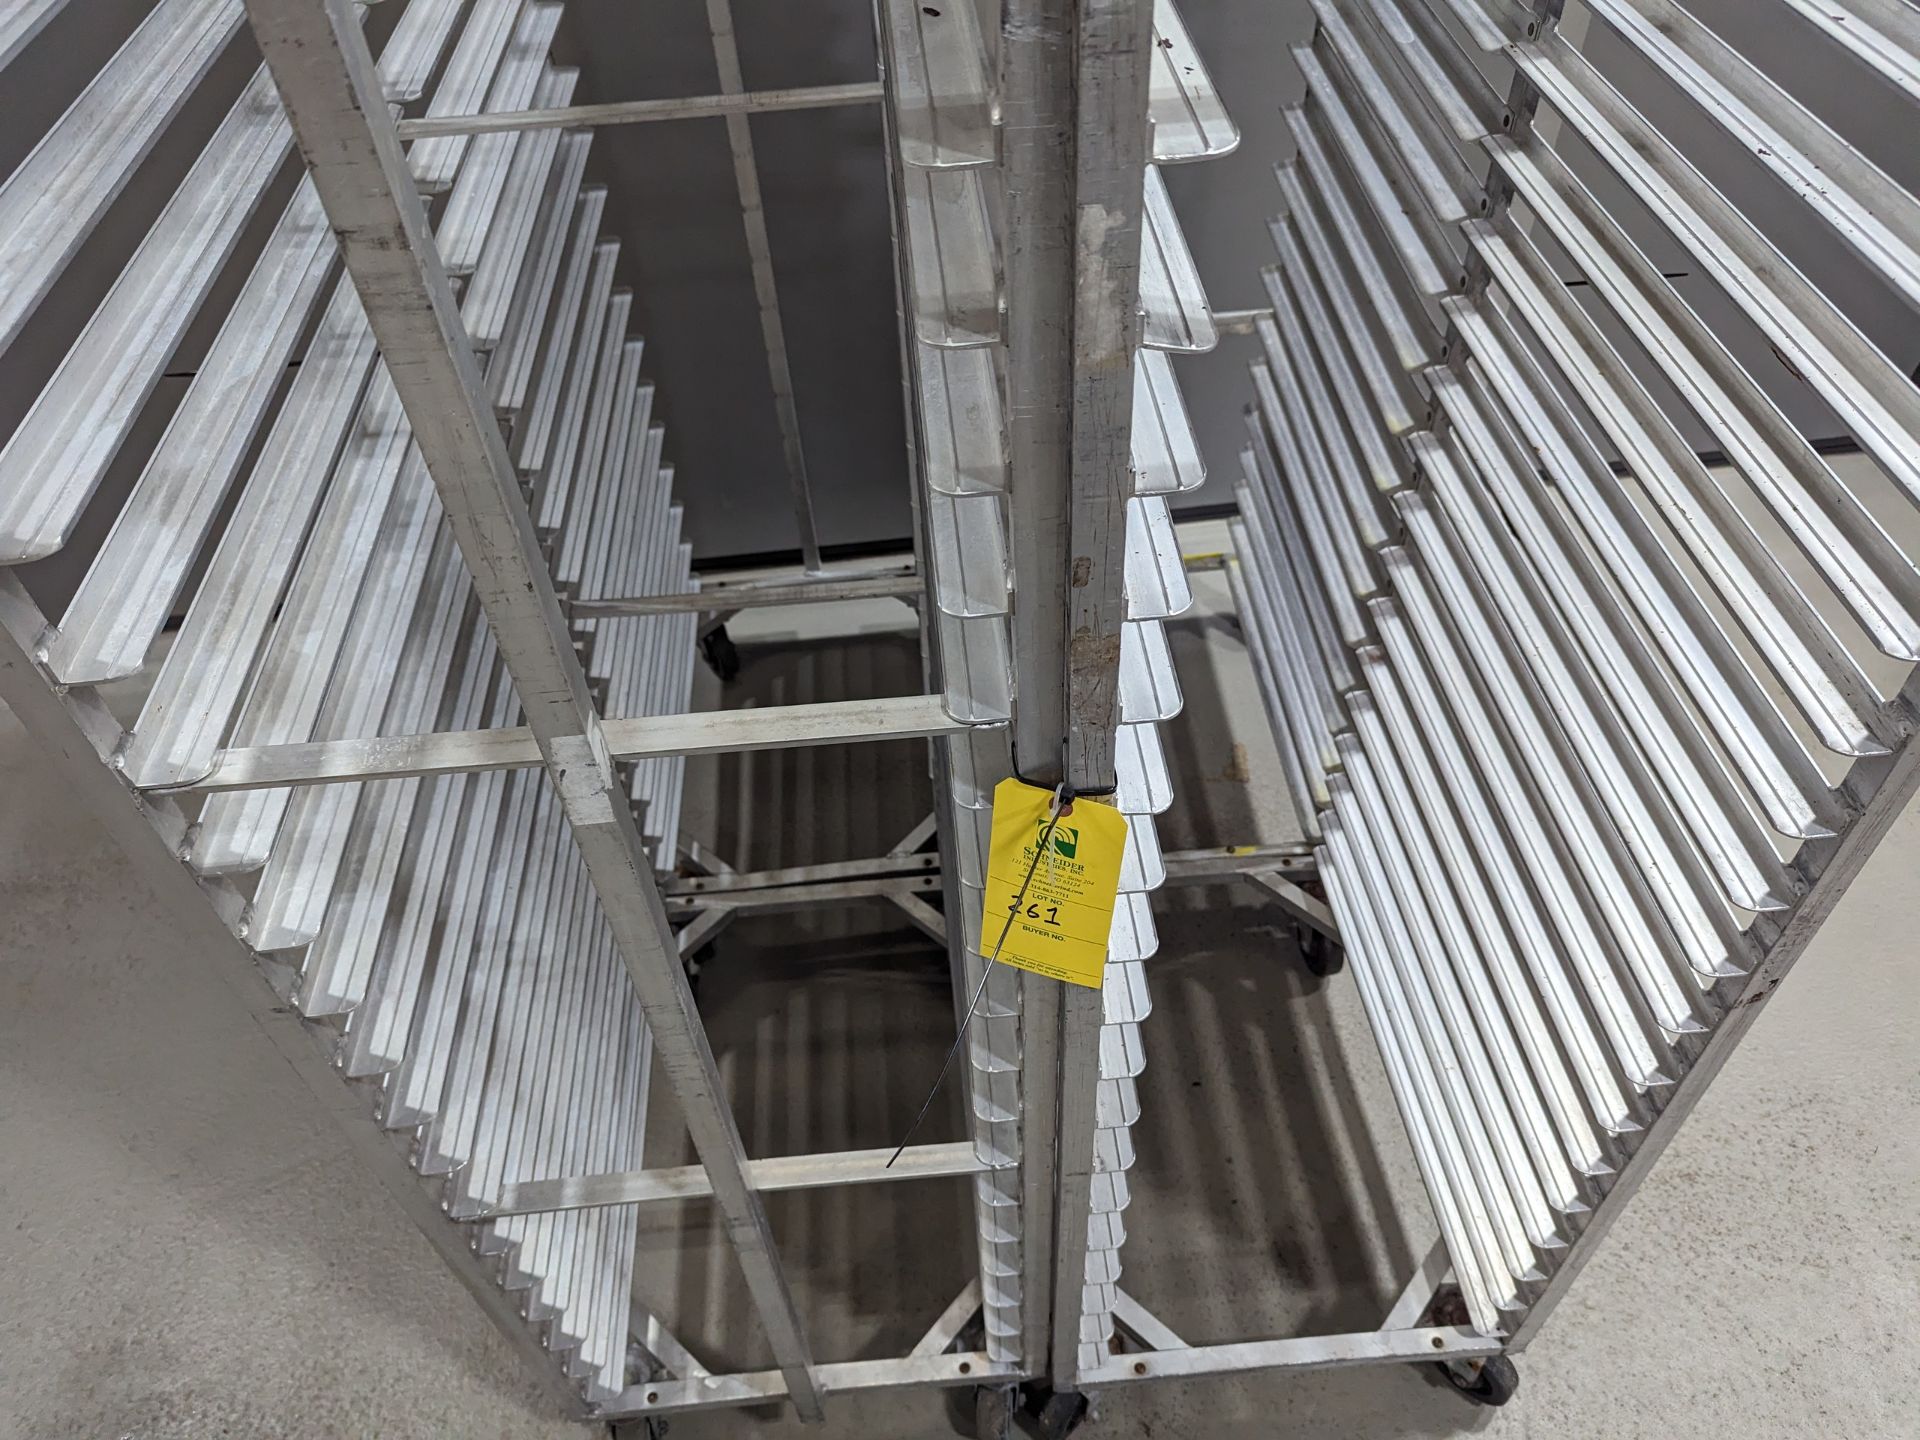 Lot of 4 Single Wide Aluminum Bakery Racks, Dimensions LxWxH: 53x41x69 Measurements are for lot of - Image 7 of 7